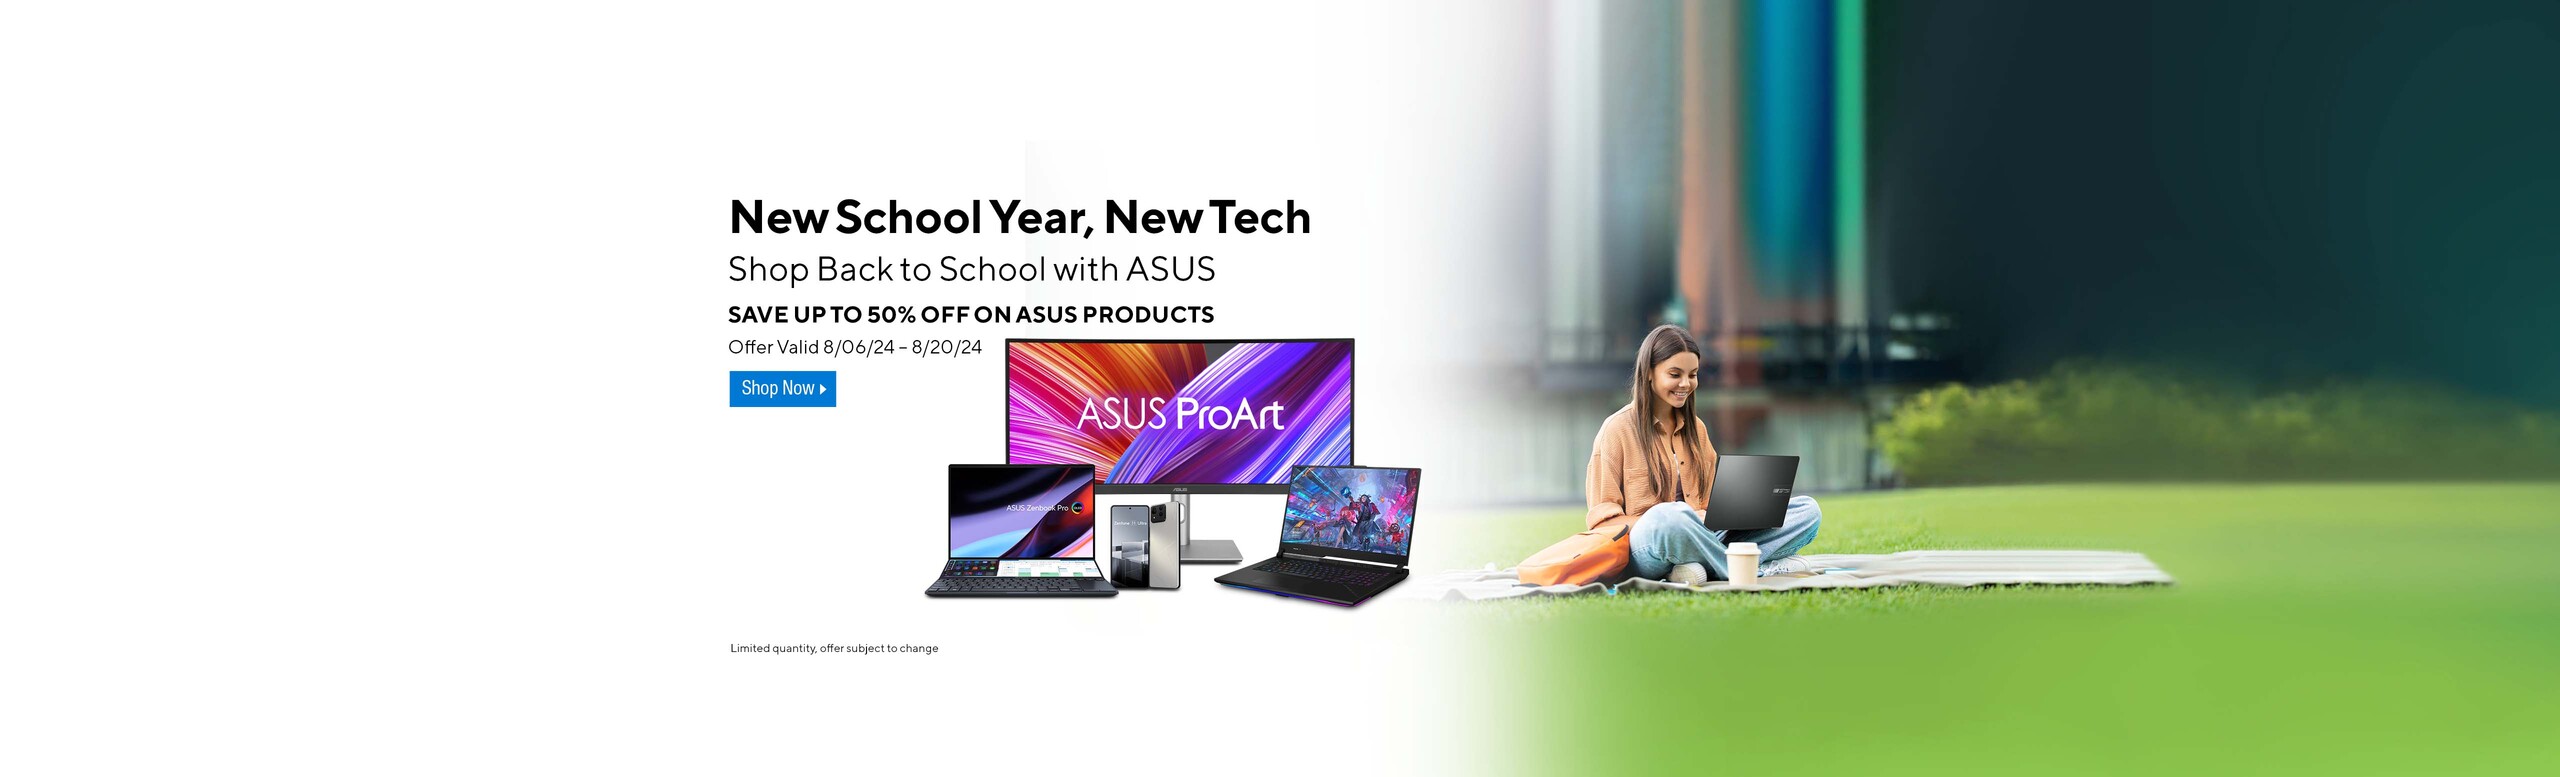 Image of girl on the grass with a laptop and an assortment of ASUS tech devices.  New School Year, New Tech.  Shop Back to School with ASUS.  Students sve additional dollars on ASUS.com!  Sign up with your Student ID and consent to receive ASUS EDMS to get coupon. Offer valid 8/06/24-8/20/24  Shop Now.  Limited quantity offer subject to change.